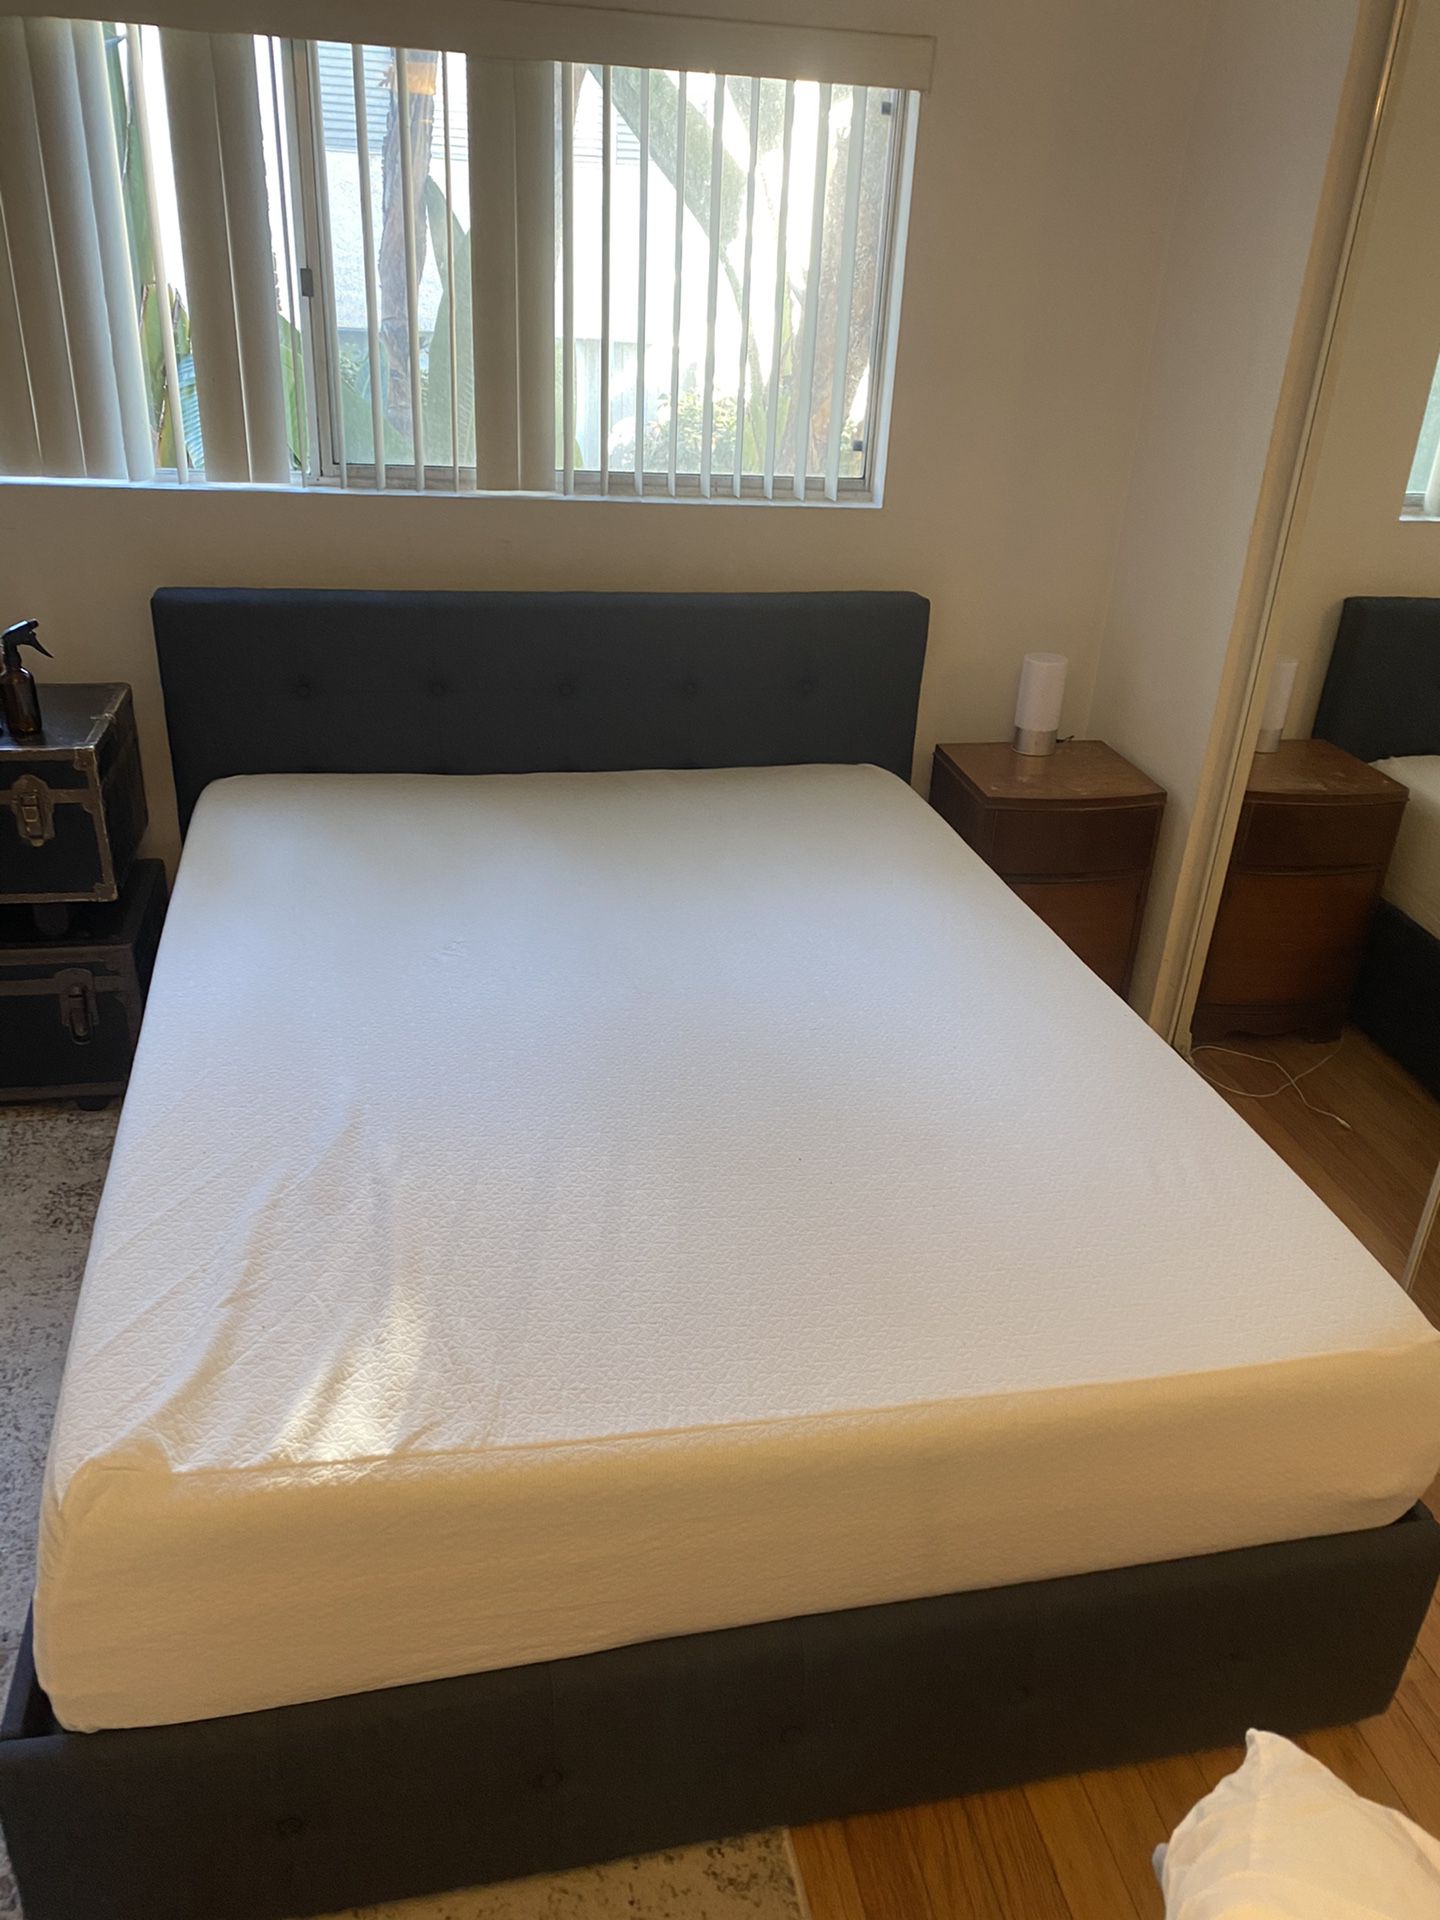 Queen mattress and bed frame with storage